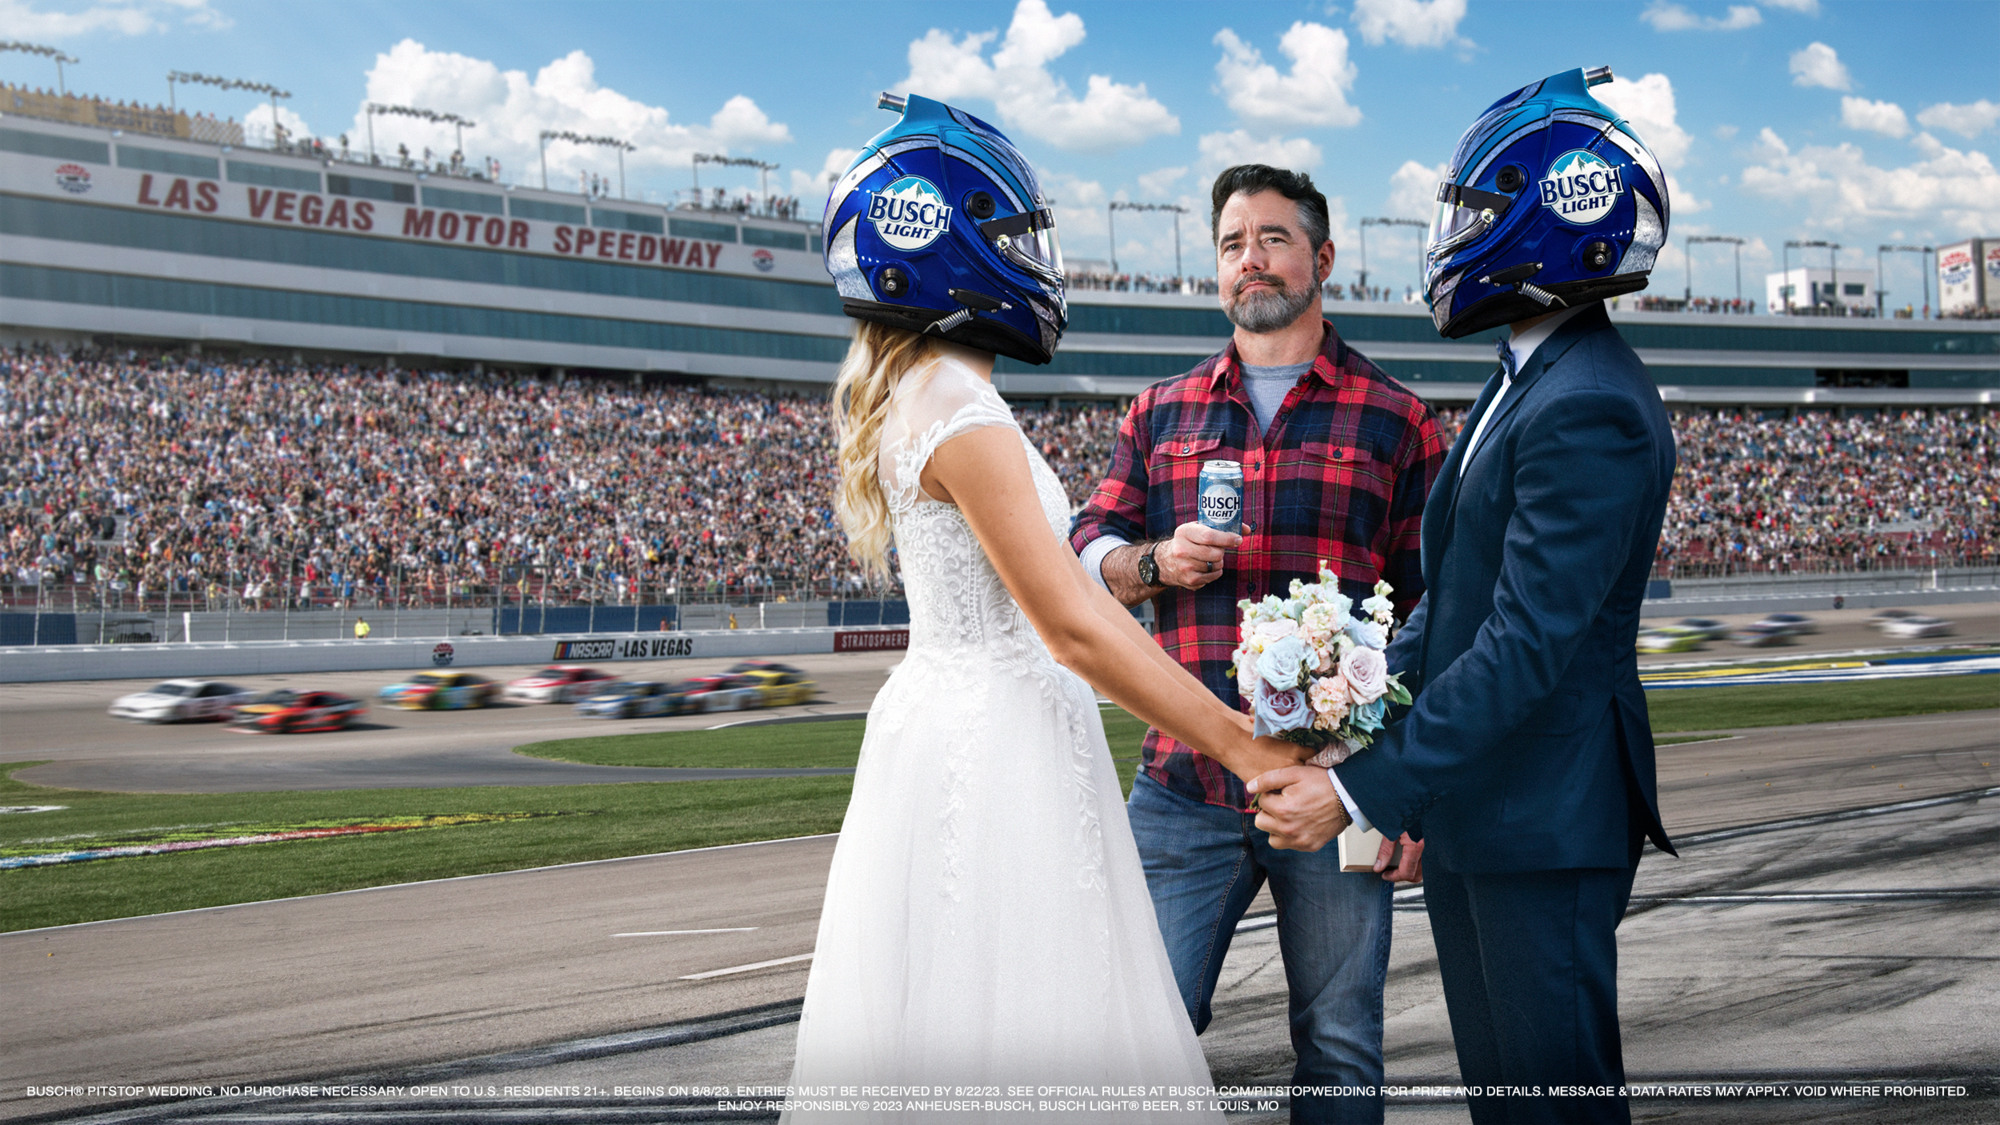 Save the Date: Busch Light to Host the Fastest Wedding in Vegas During NASCAR Race Pit Stop